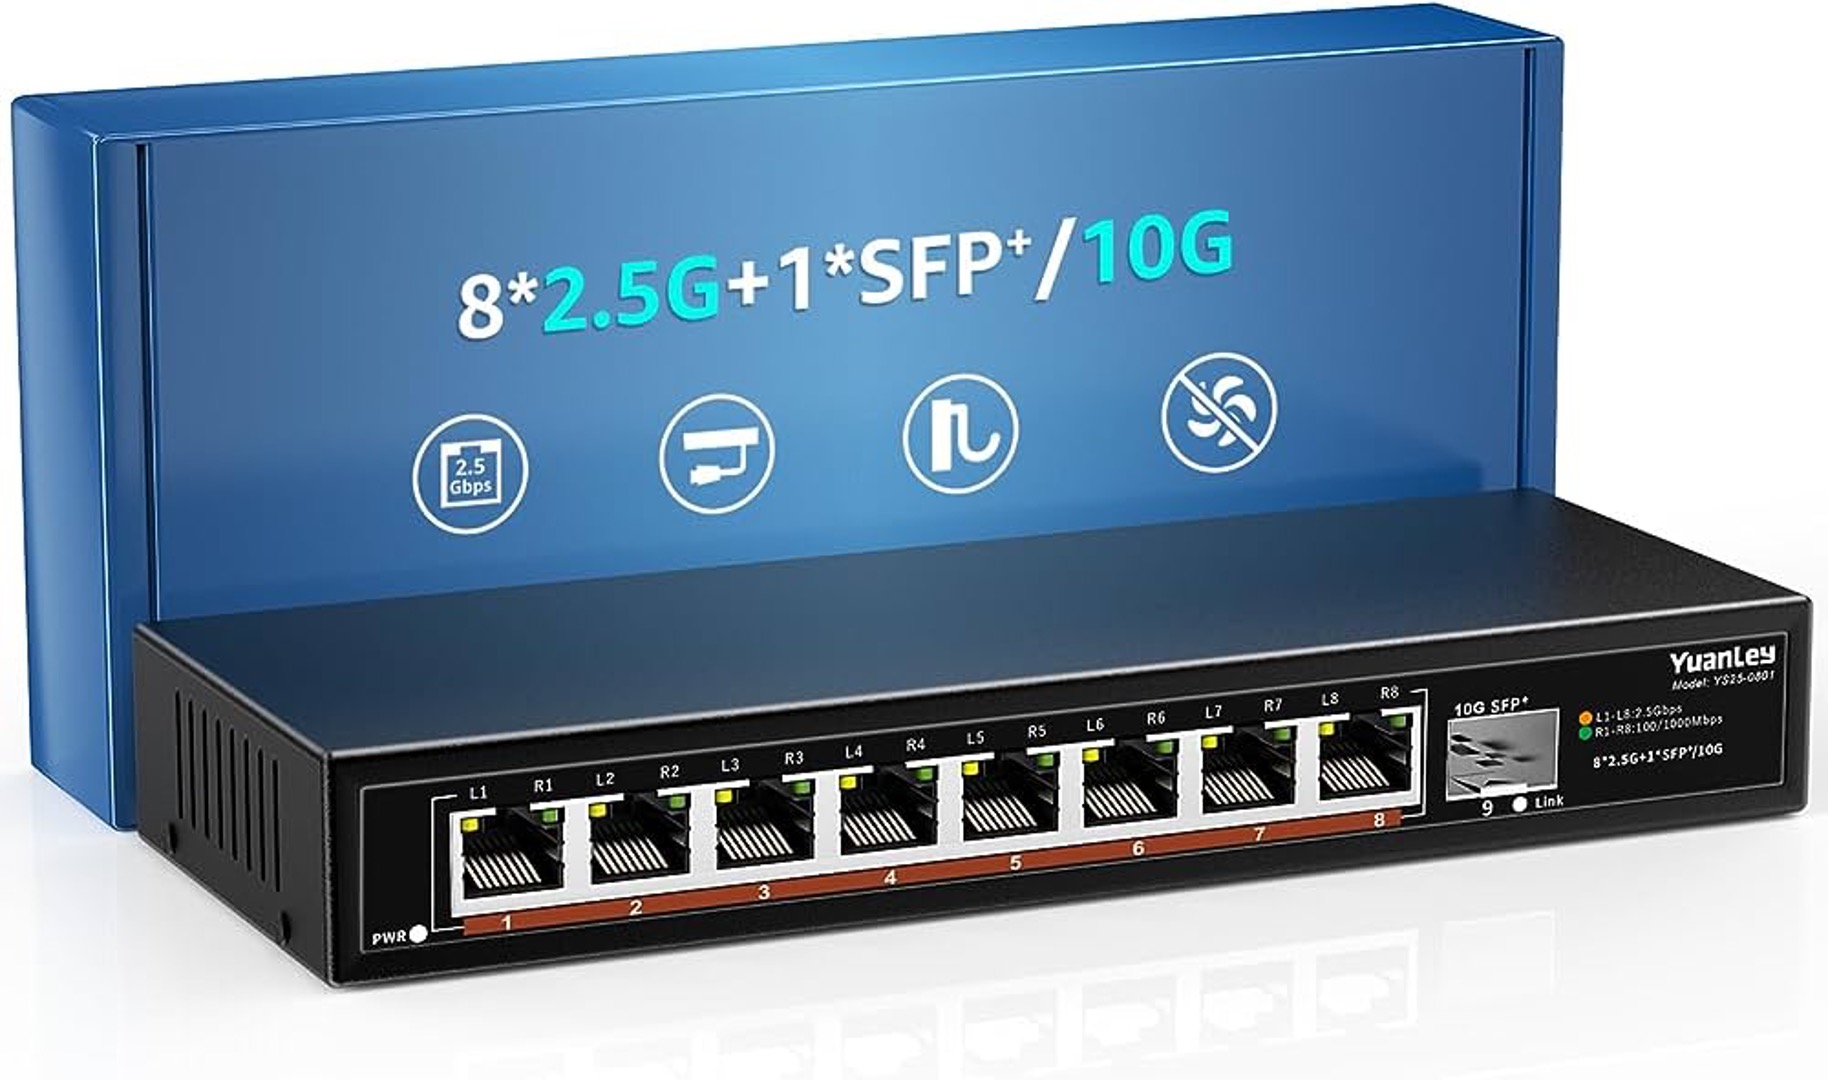 What Is The Switching Capacity Of A Network Switch?